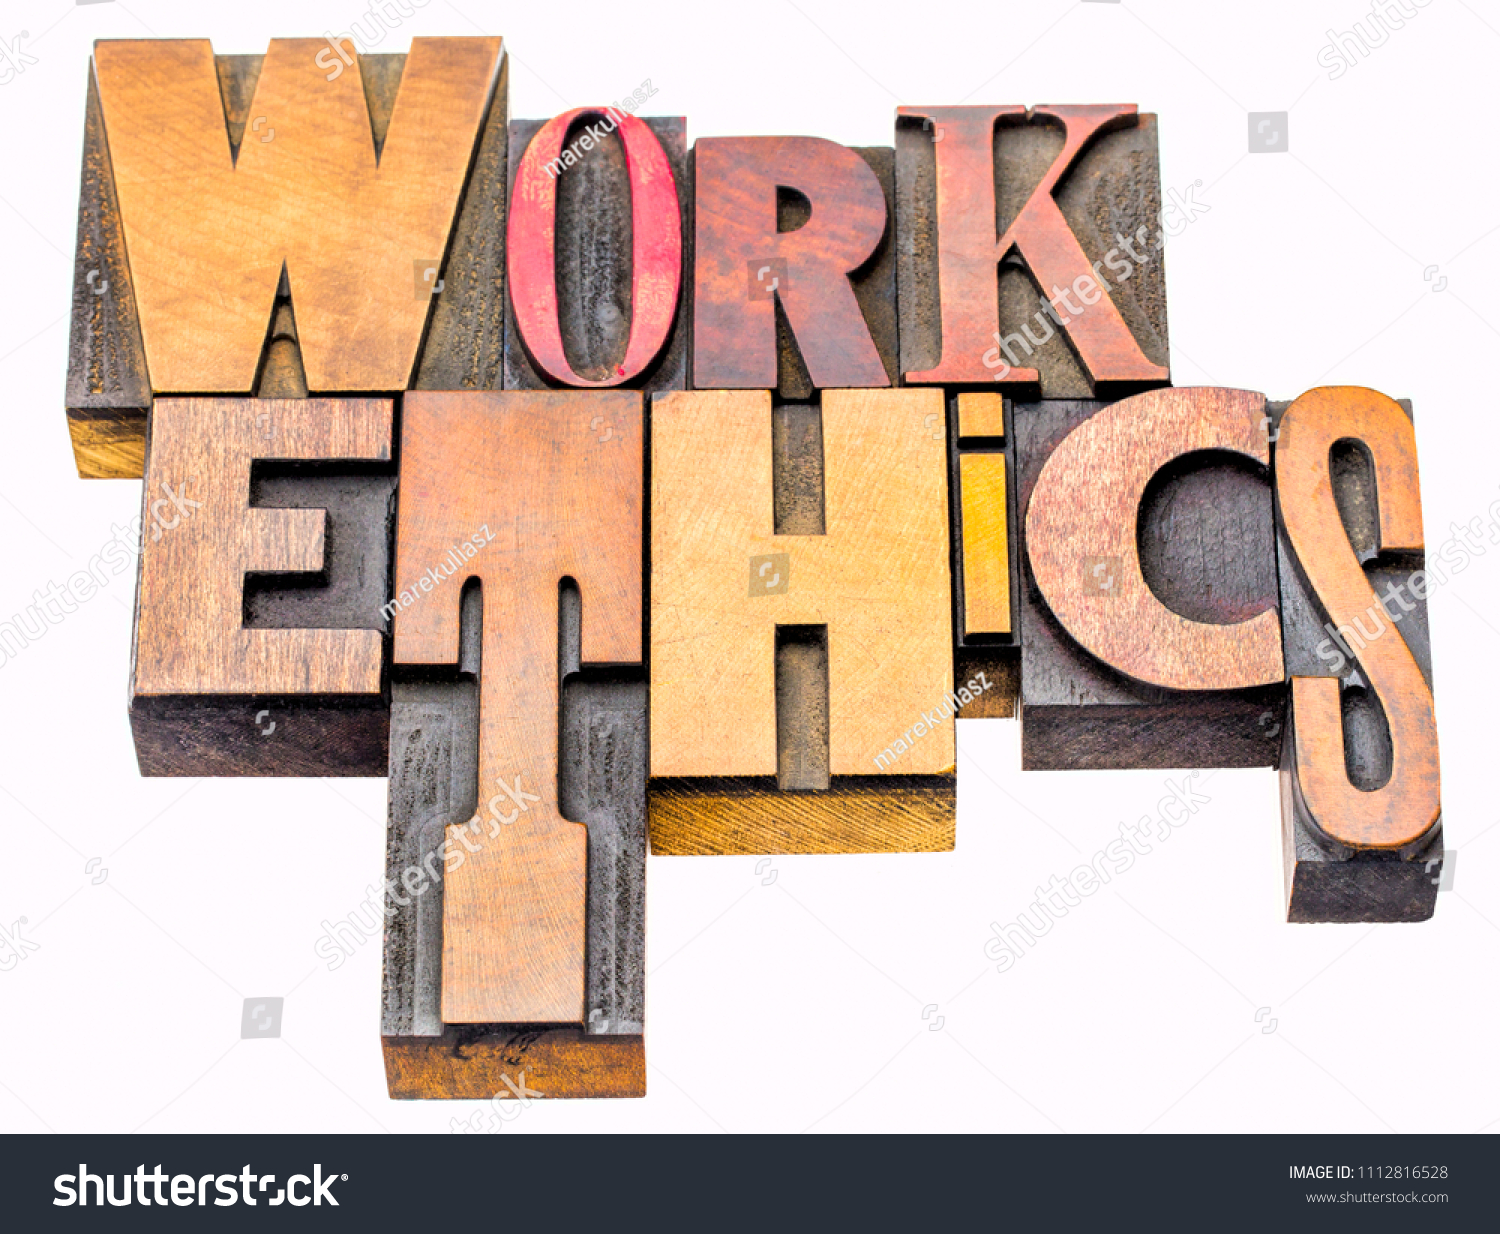 work ethics - isolated word abstract in vintage letterpress printing blocks #1112816528